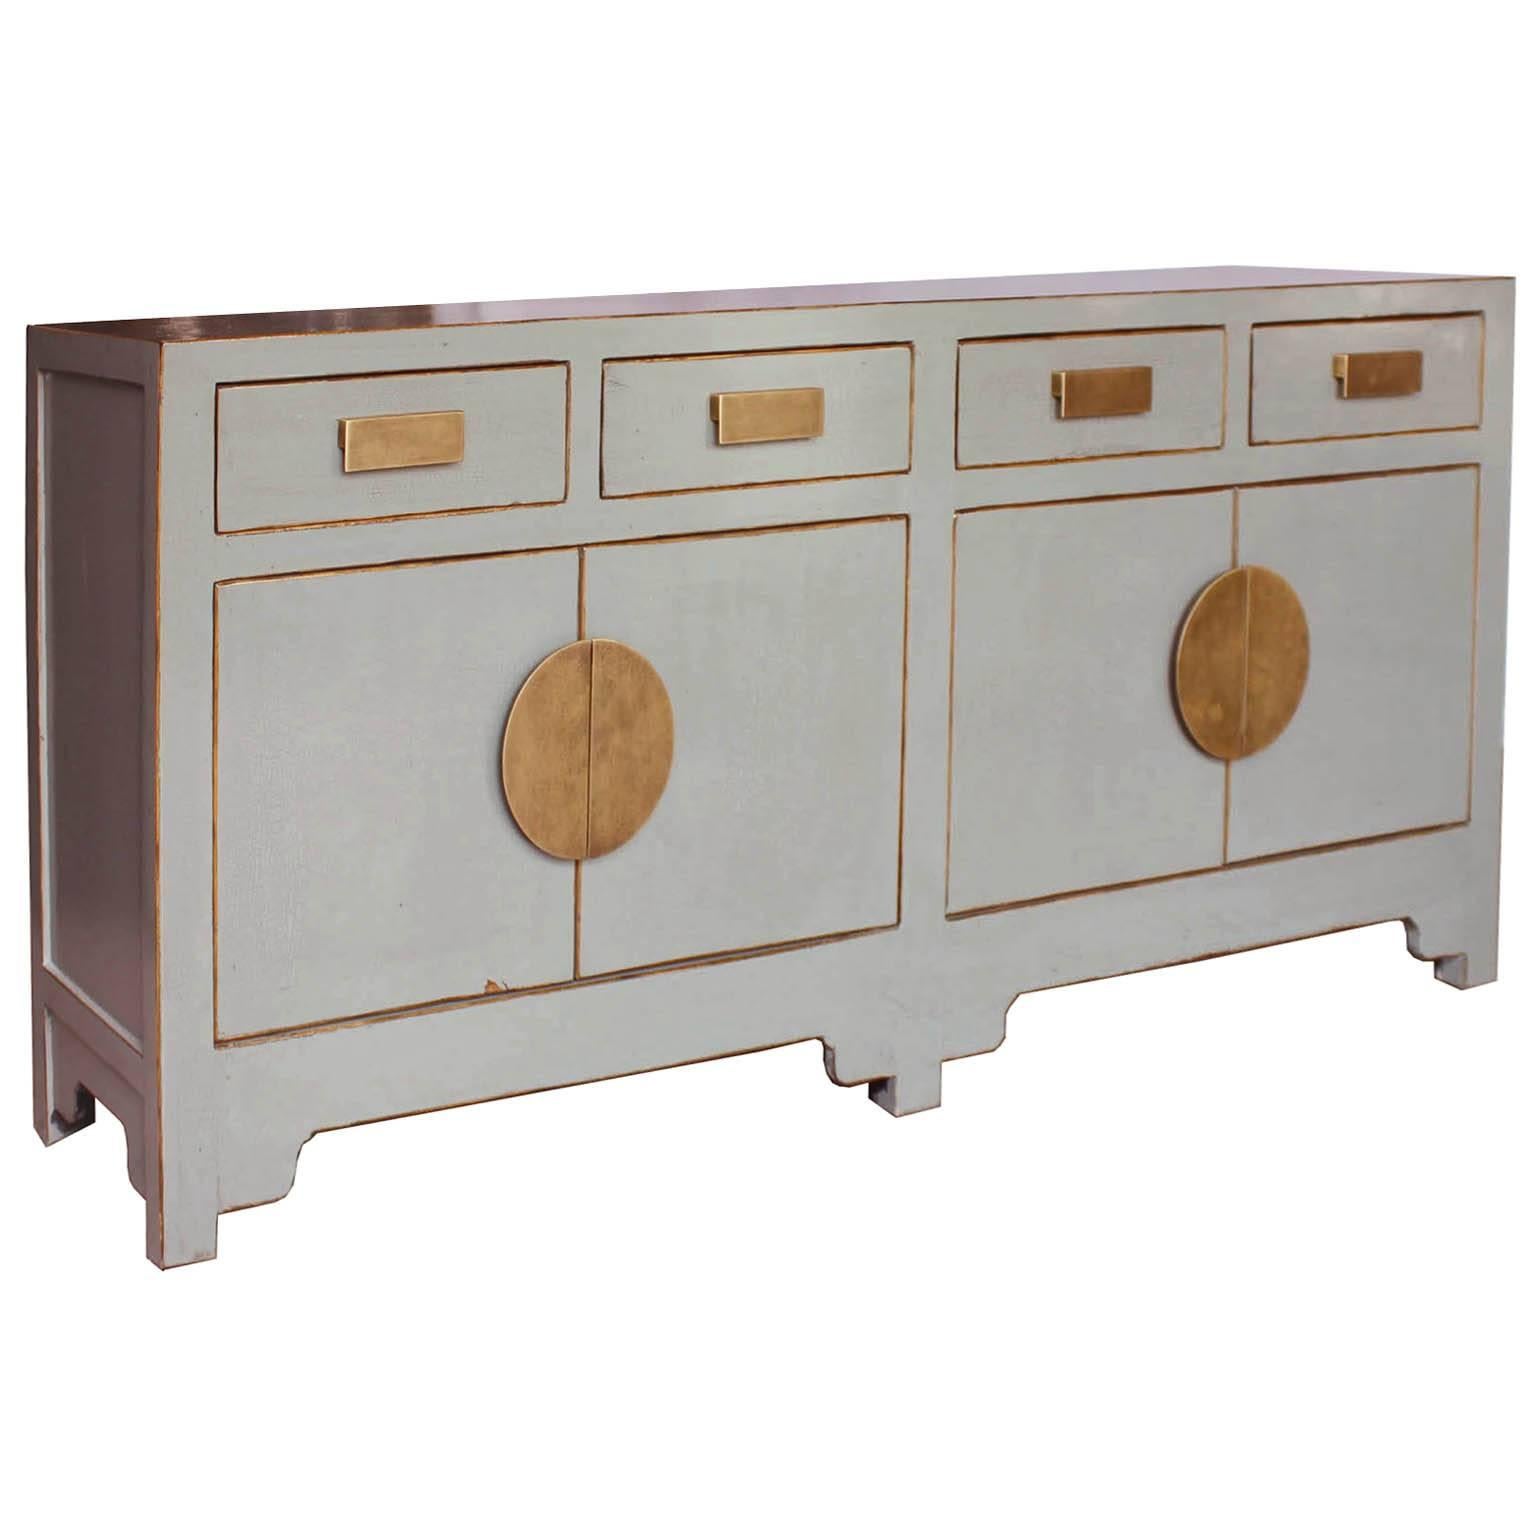 Place this gray sideboard with subtle crackle finish, bold brass hardware, exposed wood edges and clean lines in a modern living or dining room as a focal point.